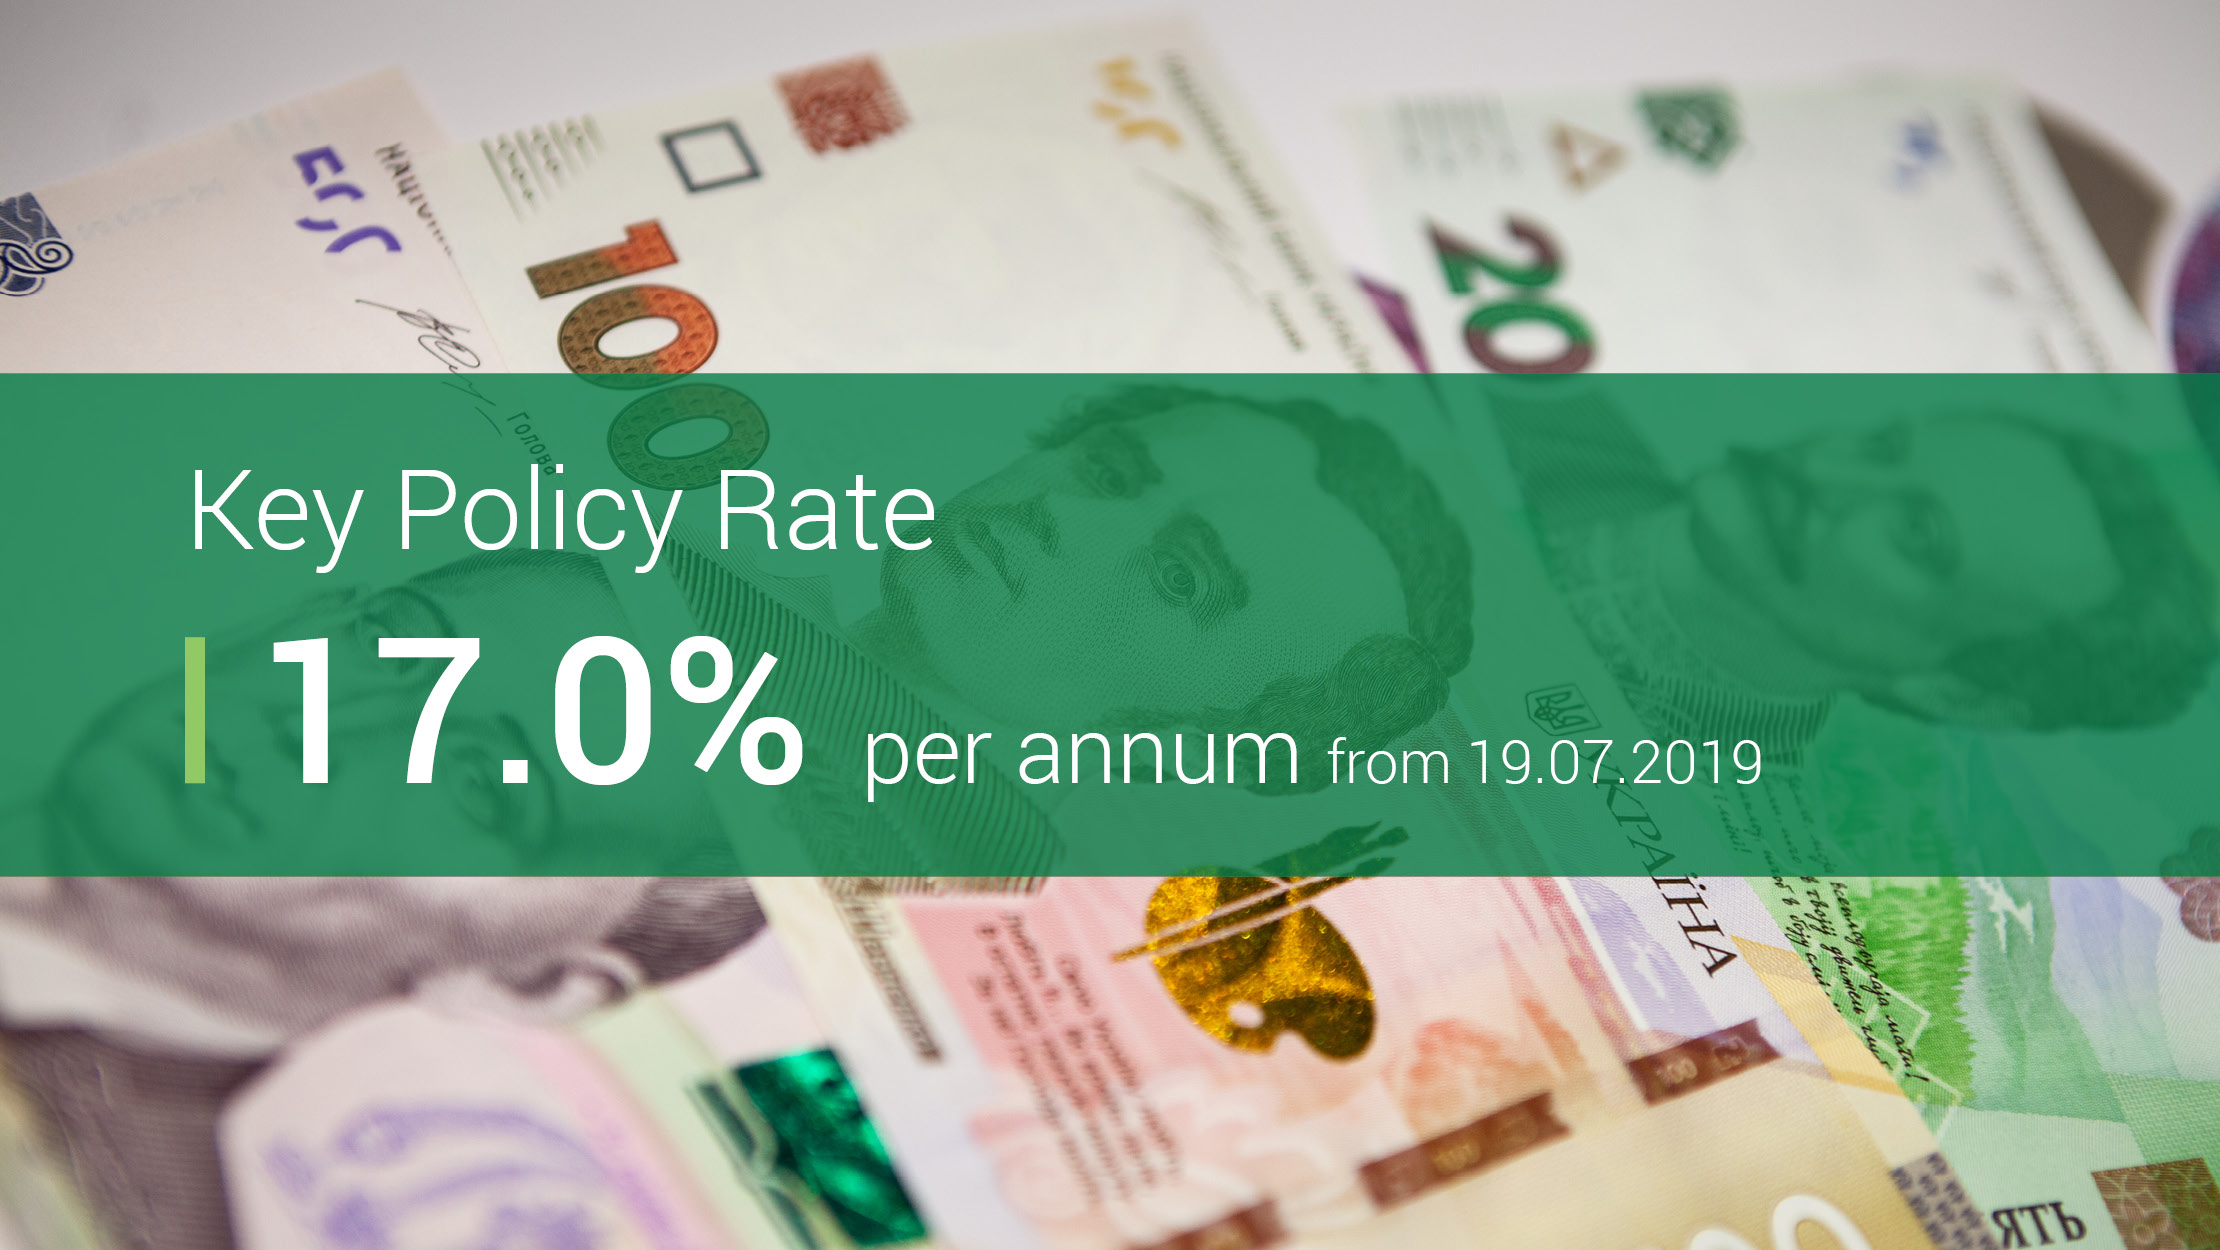 NBU Cuts the Key Policy Rate to 17.0%